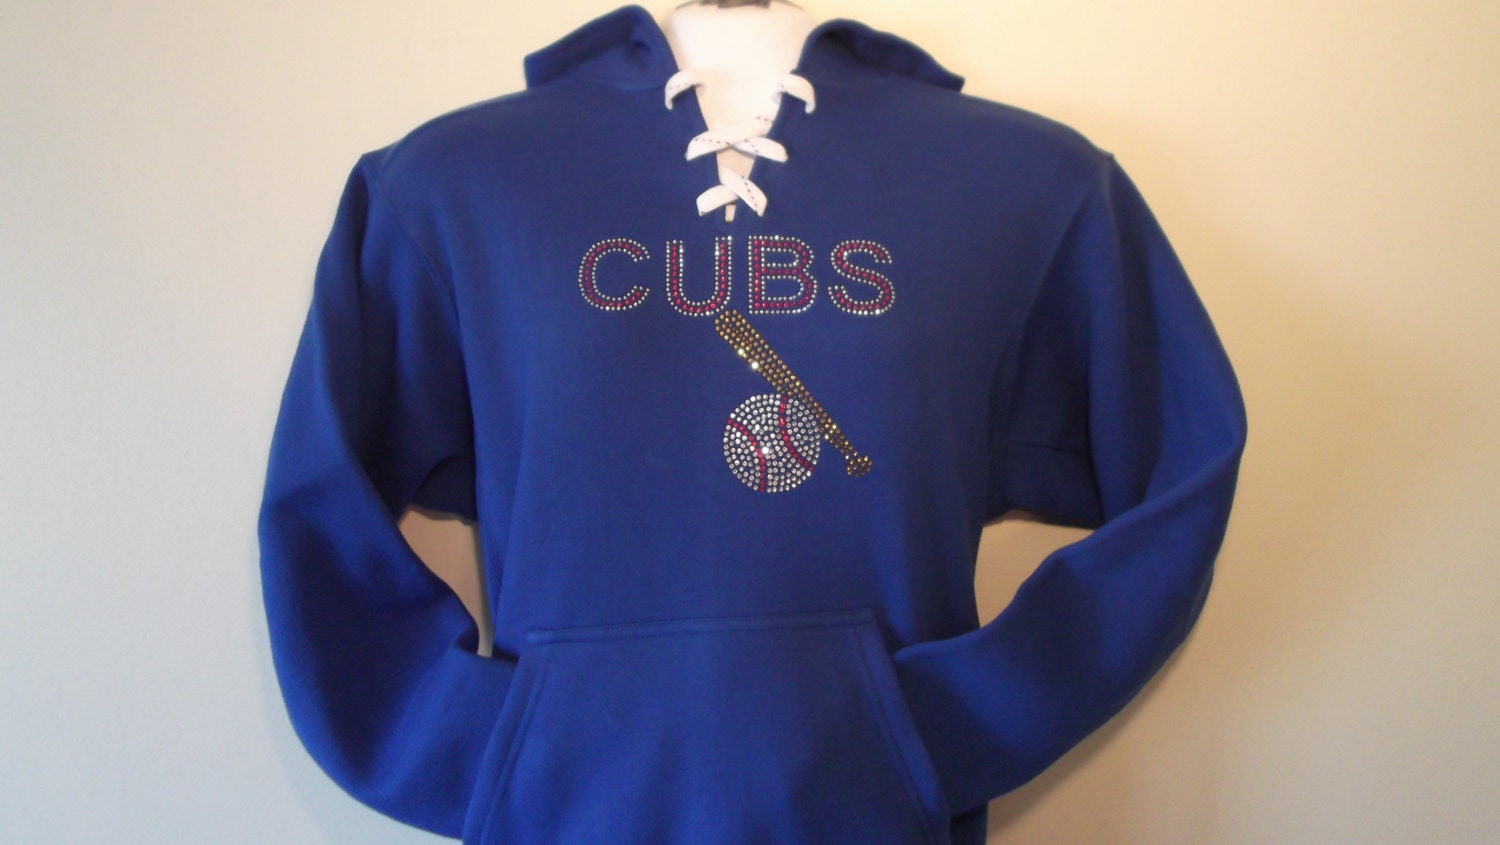 Come To The North Side Star Wars Millennium Falcon Chicago CUBS shirt,  hoodie, sweater and long sleeve